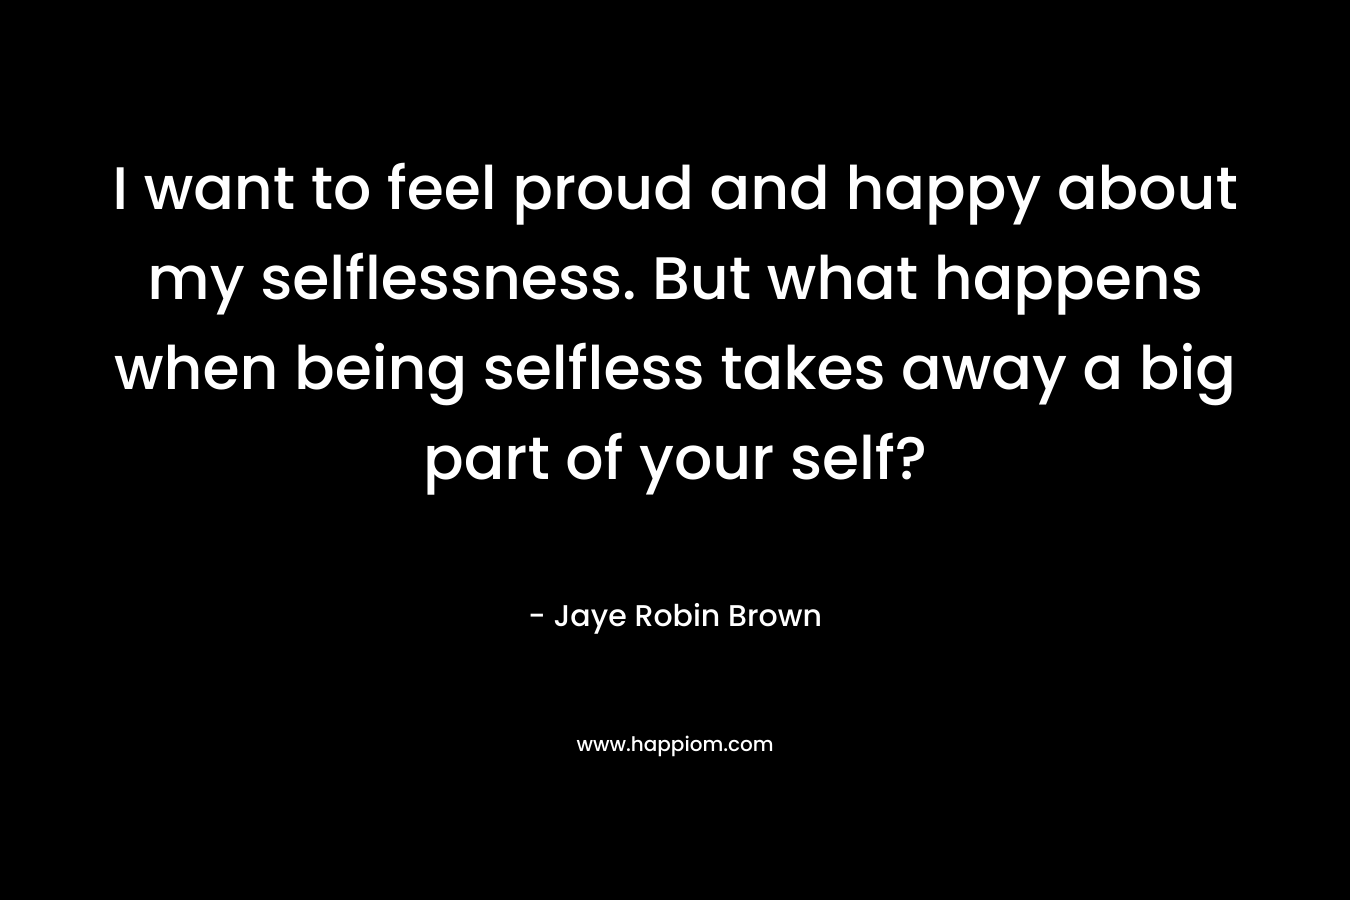 I want to feel proud and happy about my selflessness. But what happens when being selfless takes away a big part of your self?